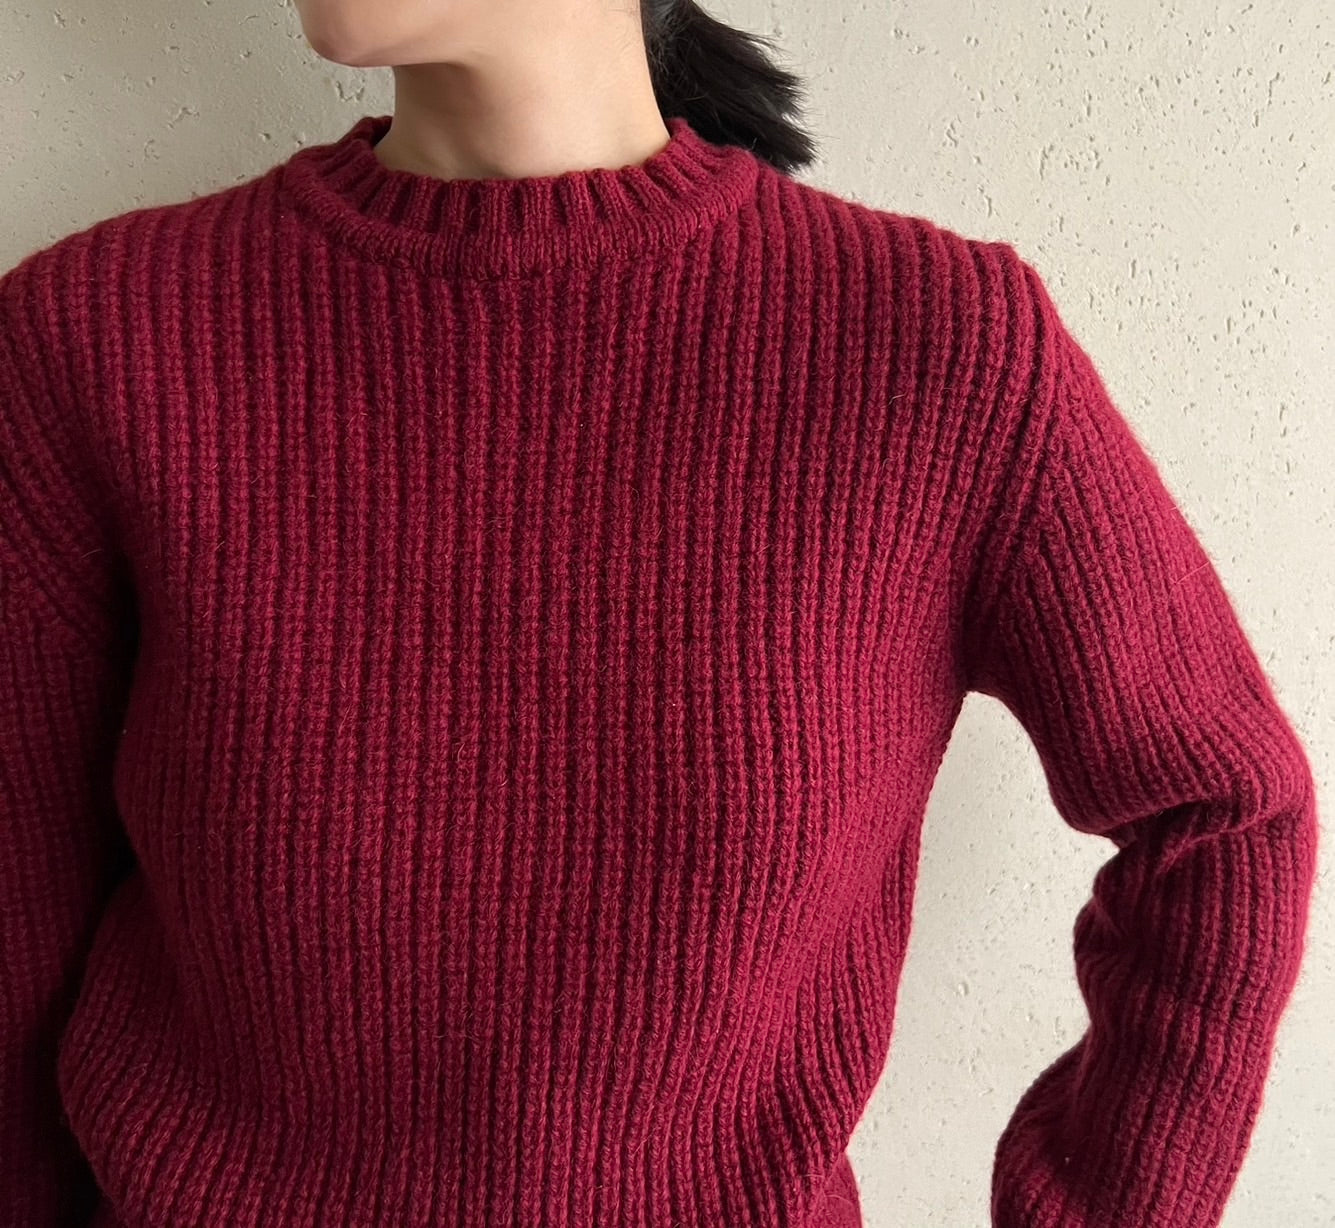 90s Knit Top